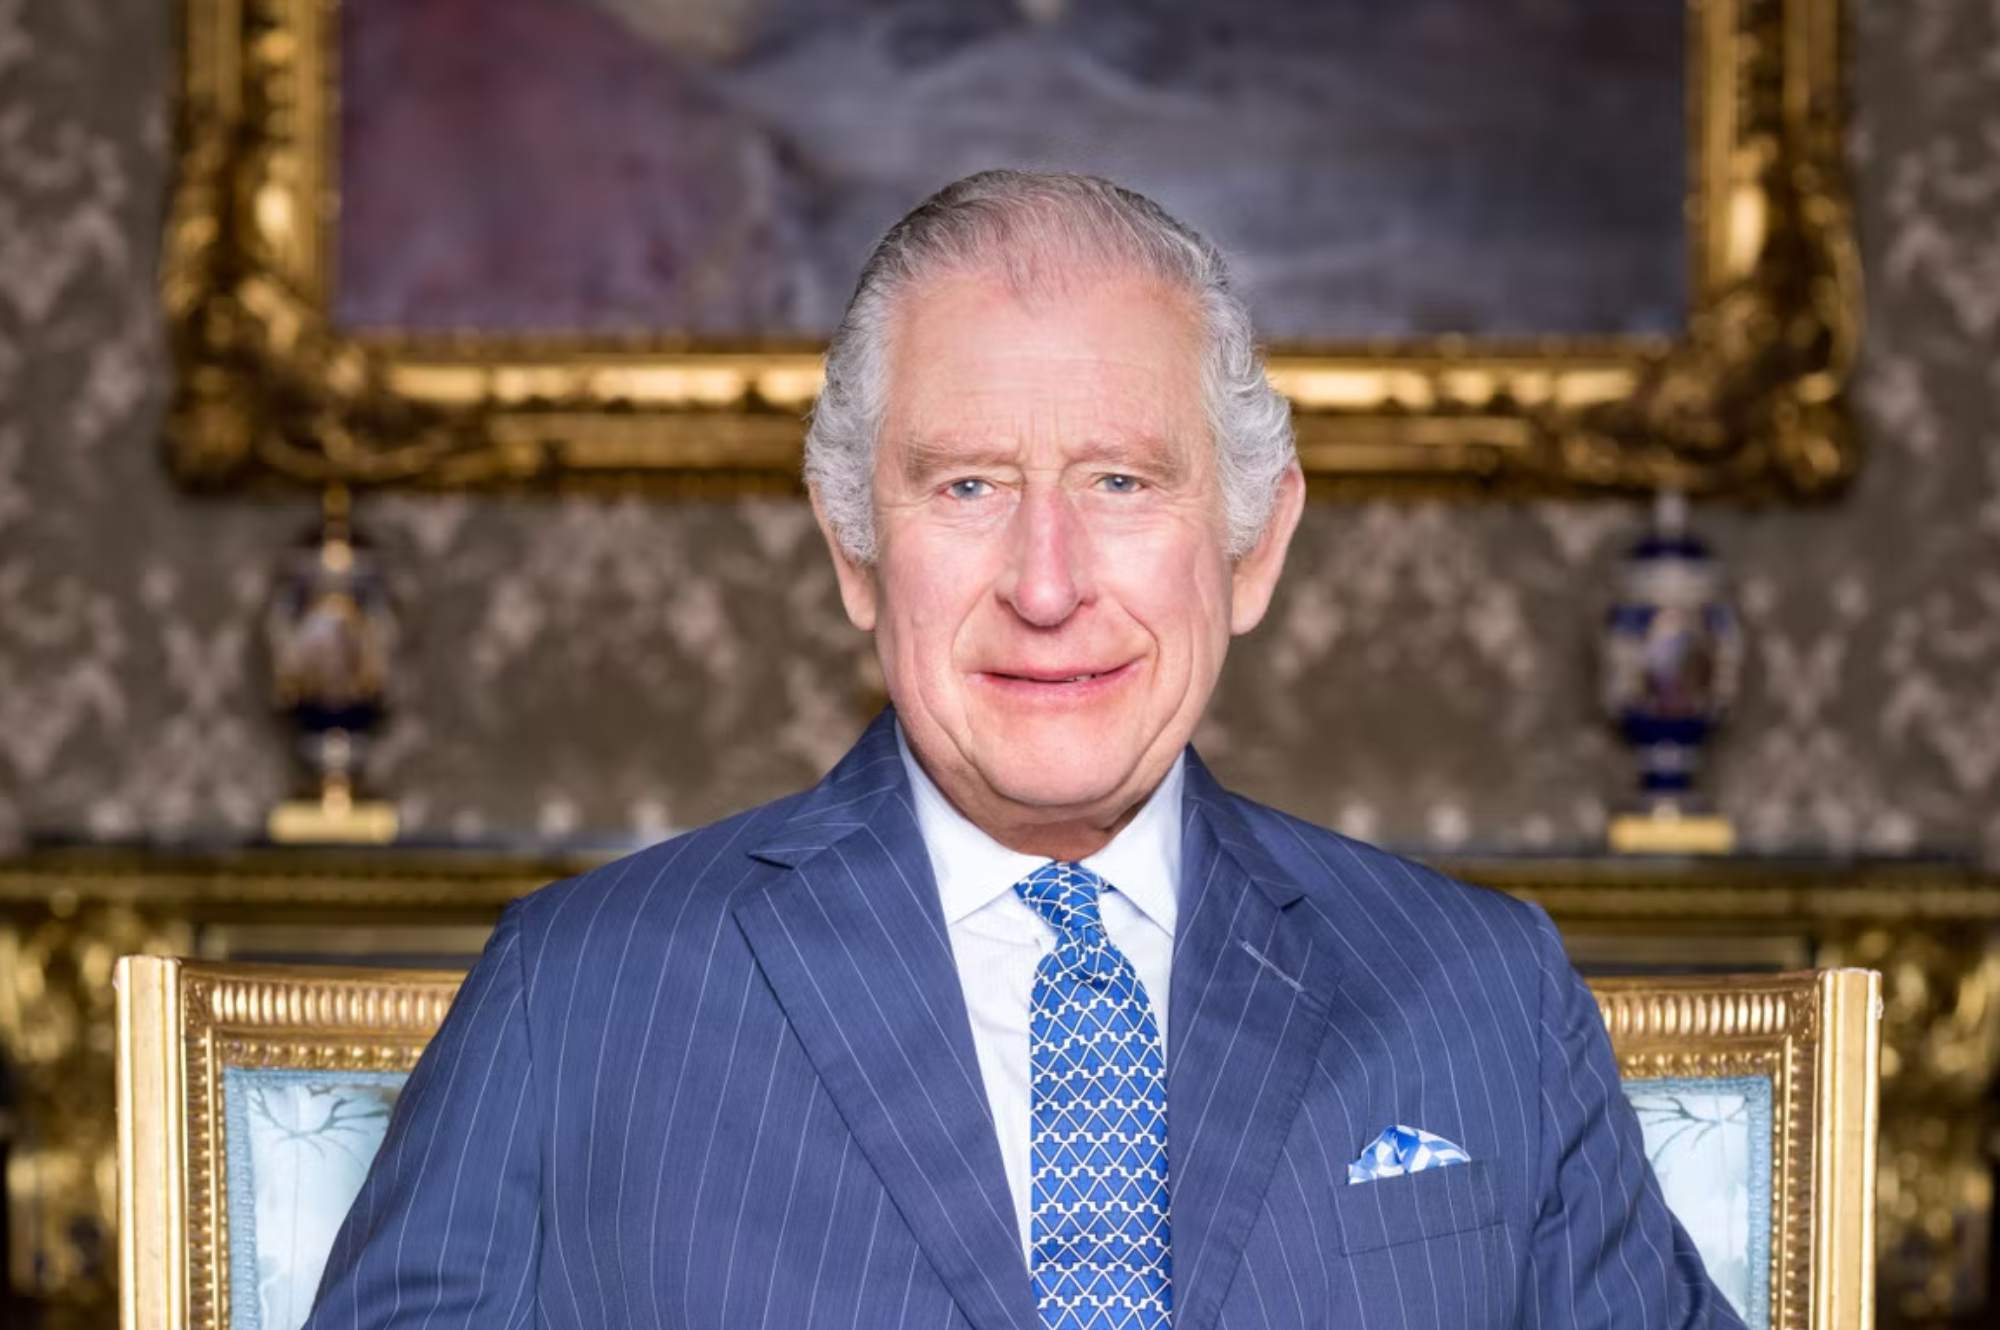 King Charles III, a passionate advocate of apprenticeships, reaches the throne